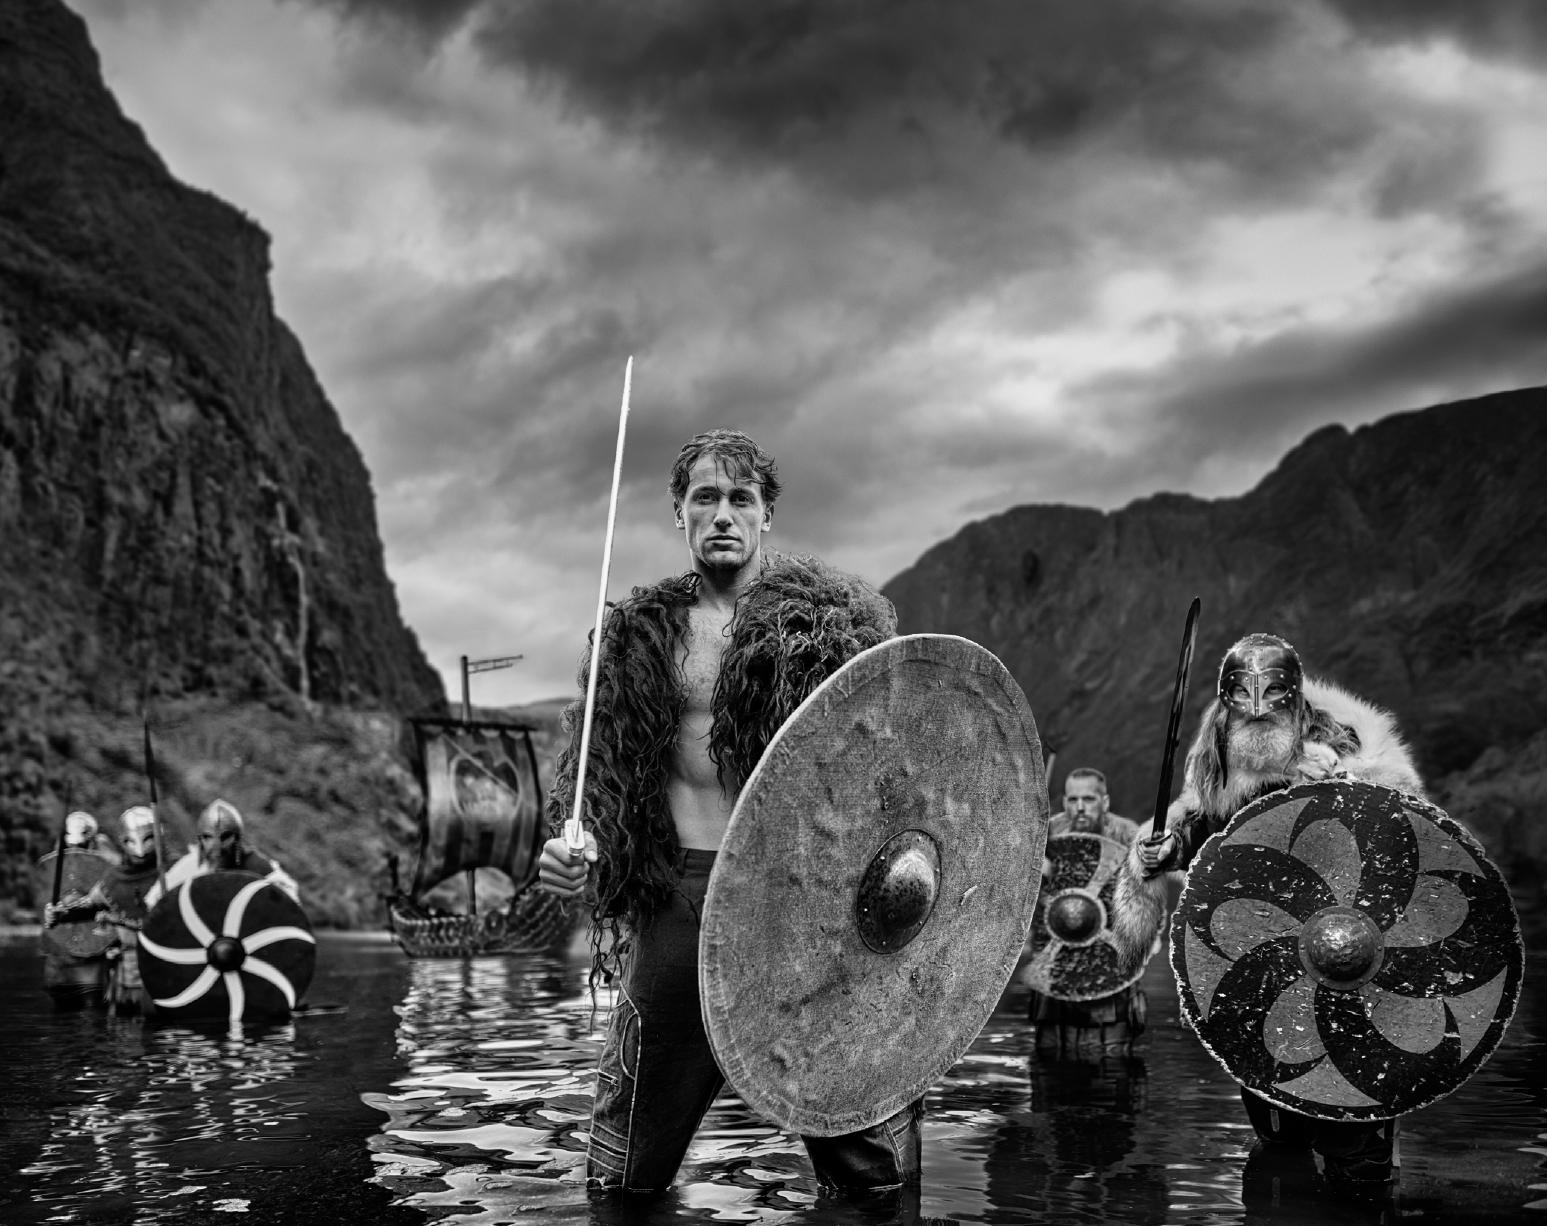 David Yarrow Black and White Photograph - 'The Viking' - Vikings standing in a Fjord, fine art photography, 2023